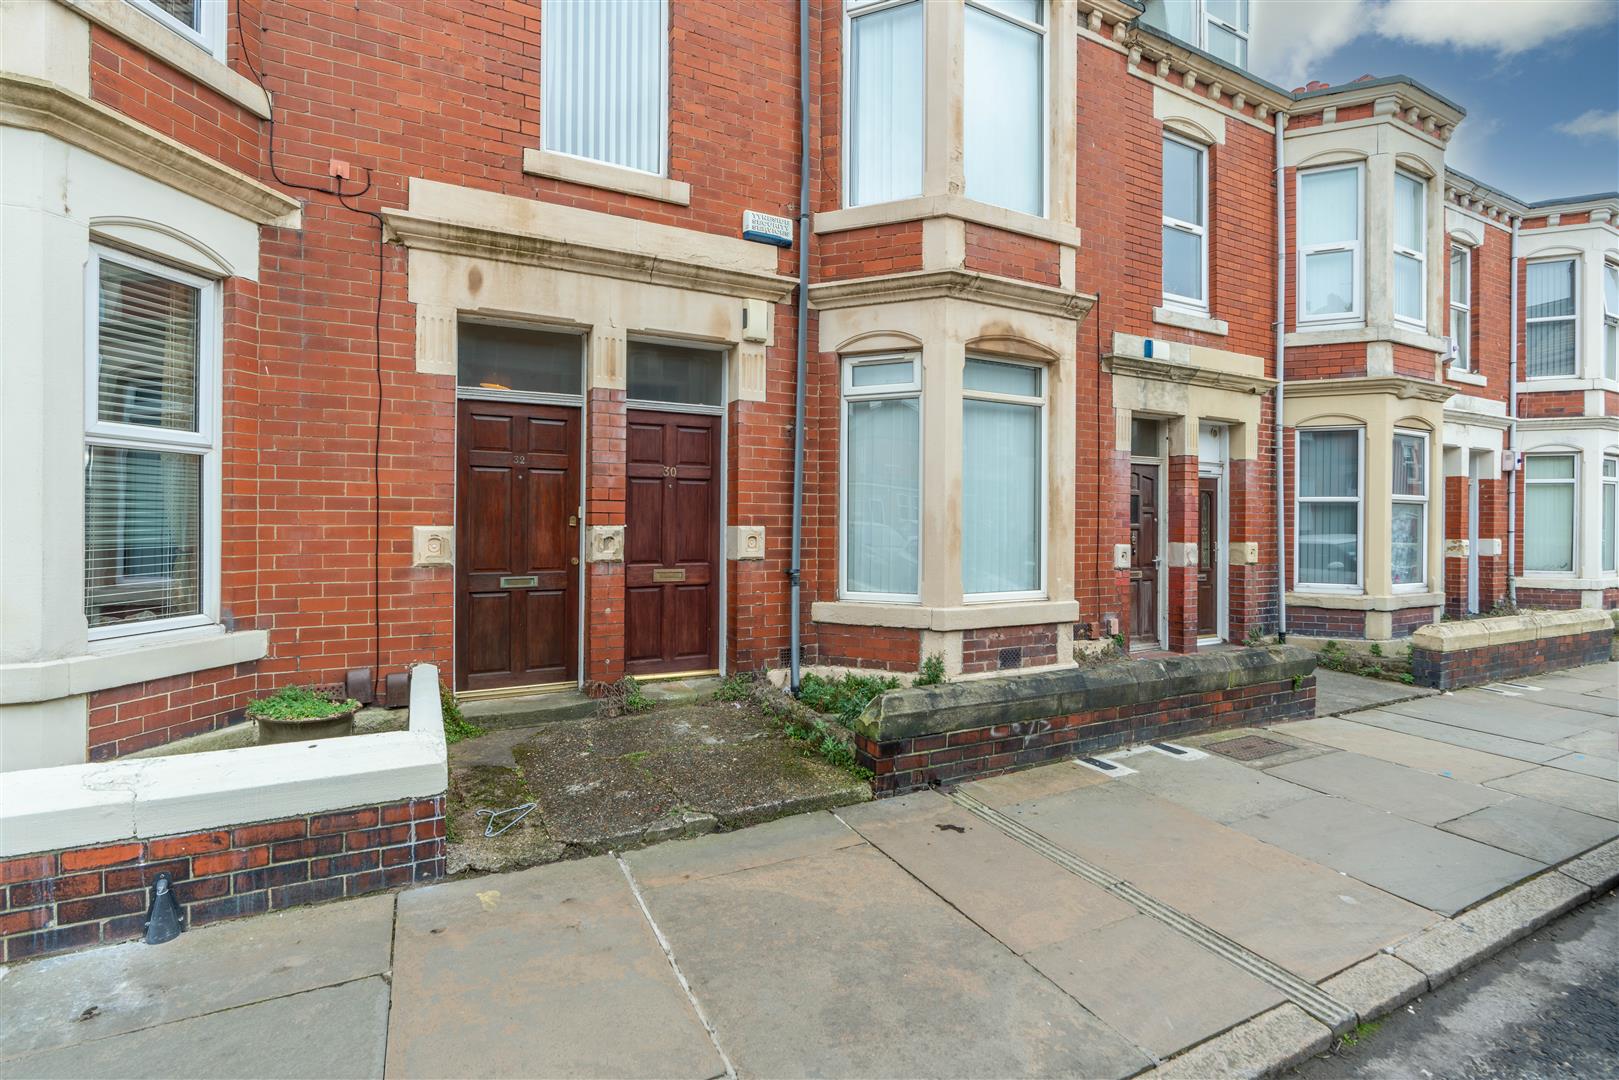 2 bed flat for sale in Addycombe Terrace, Newcastle upon Tyne - Property Image 1